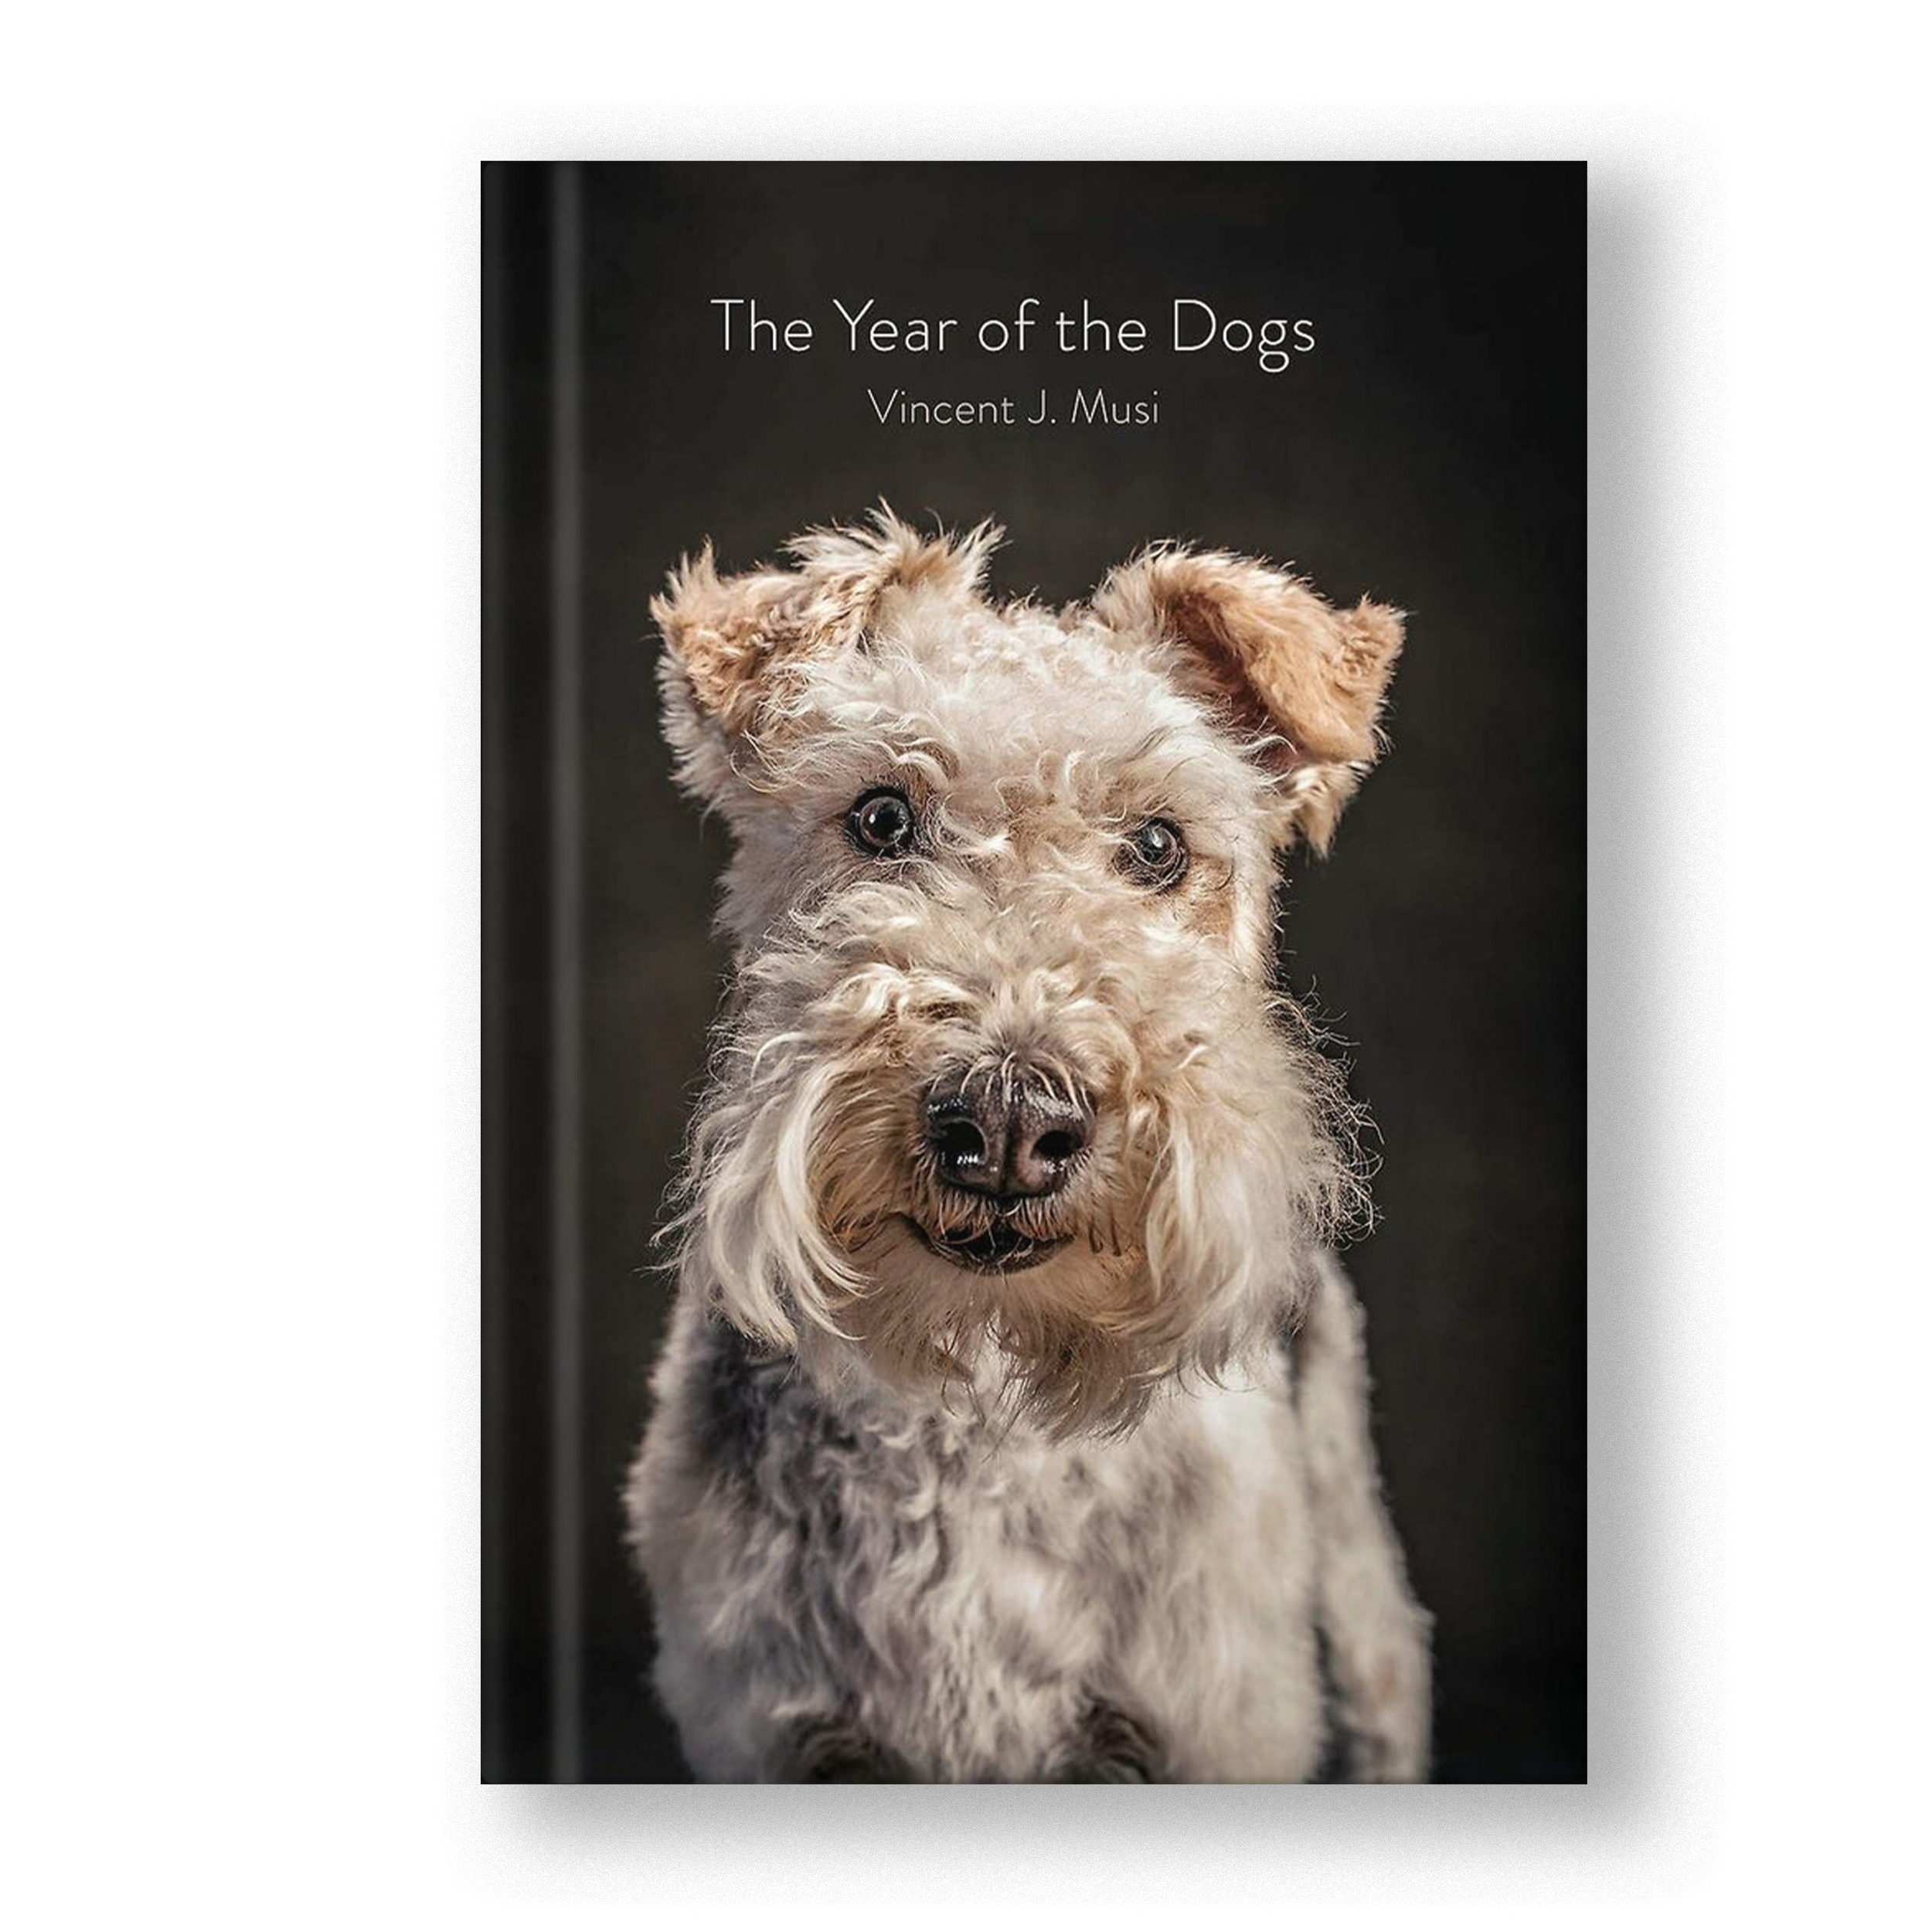 THE YEAR OF THE DOGS